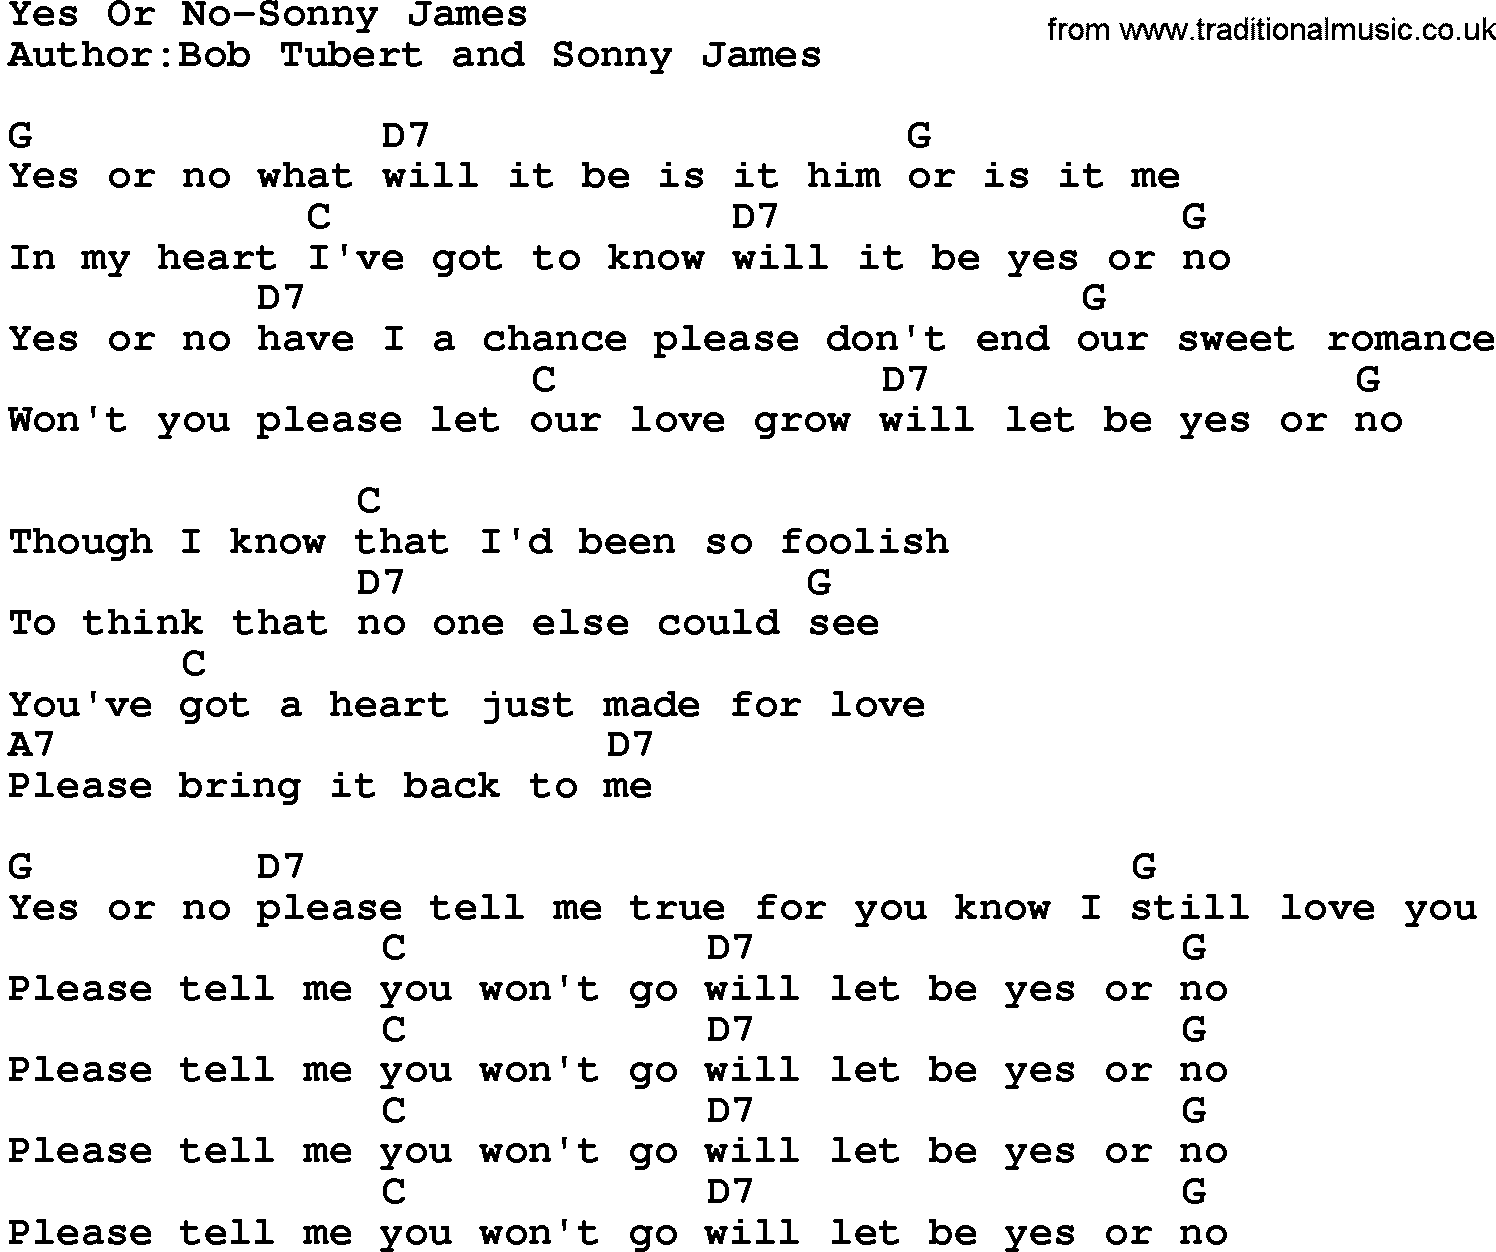 Country music song: Yes Or No-Sonny James lyrics and chords